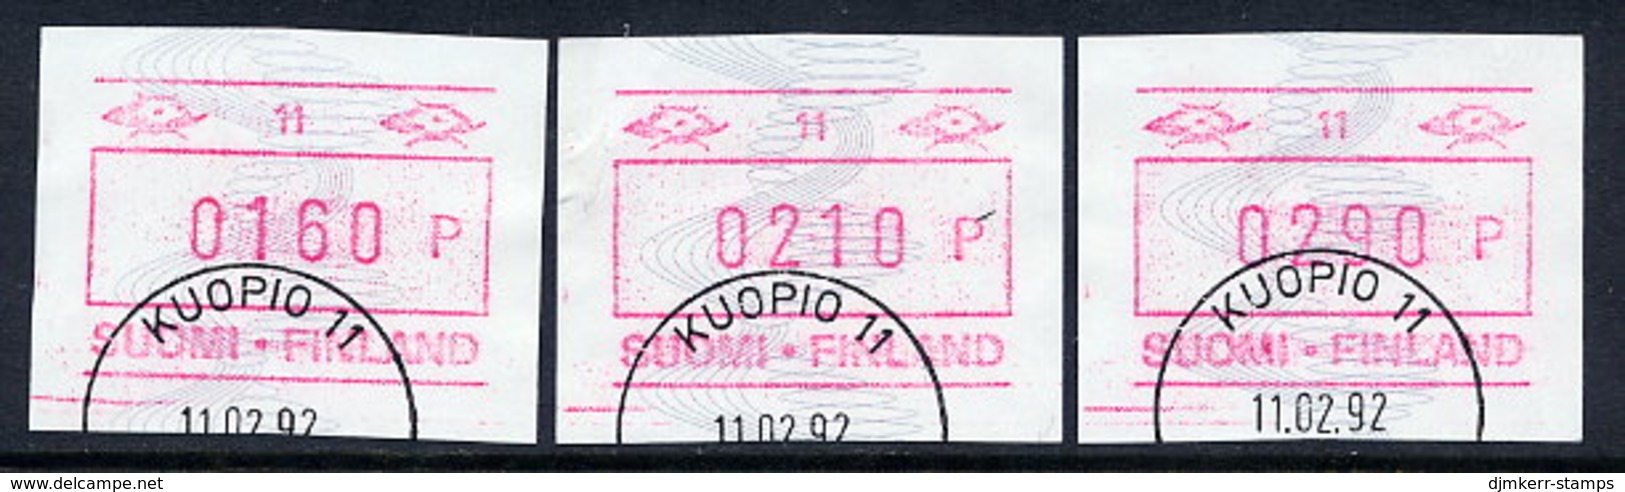 FINLAND 1990 Definitive With ATM Number , 3 Different Values Used .Michel 8 - Vignette [ATM]